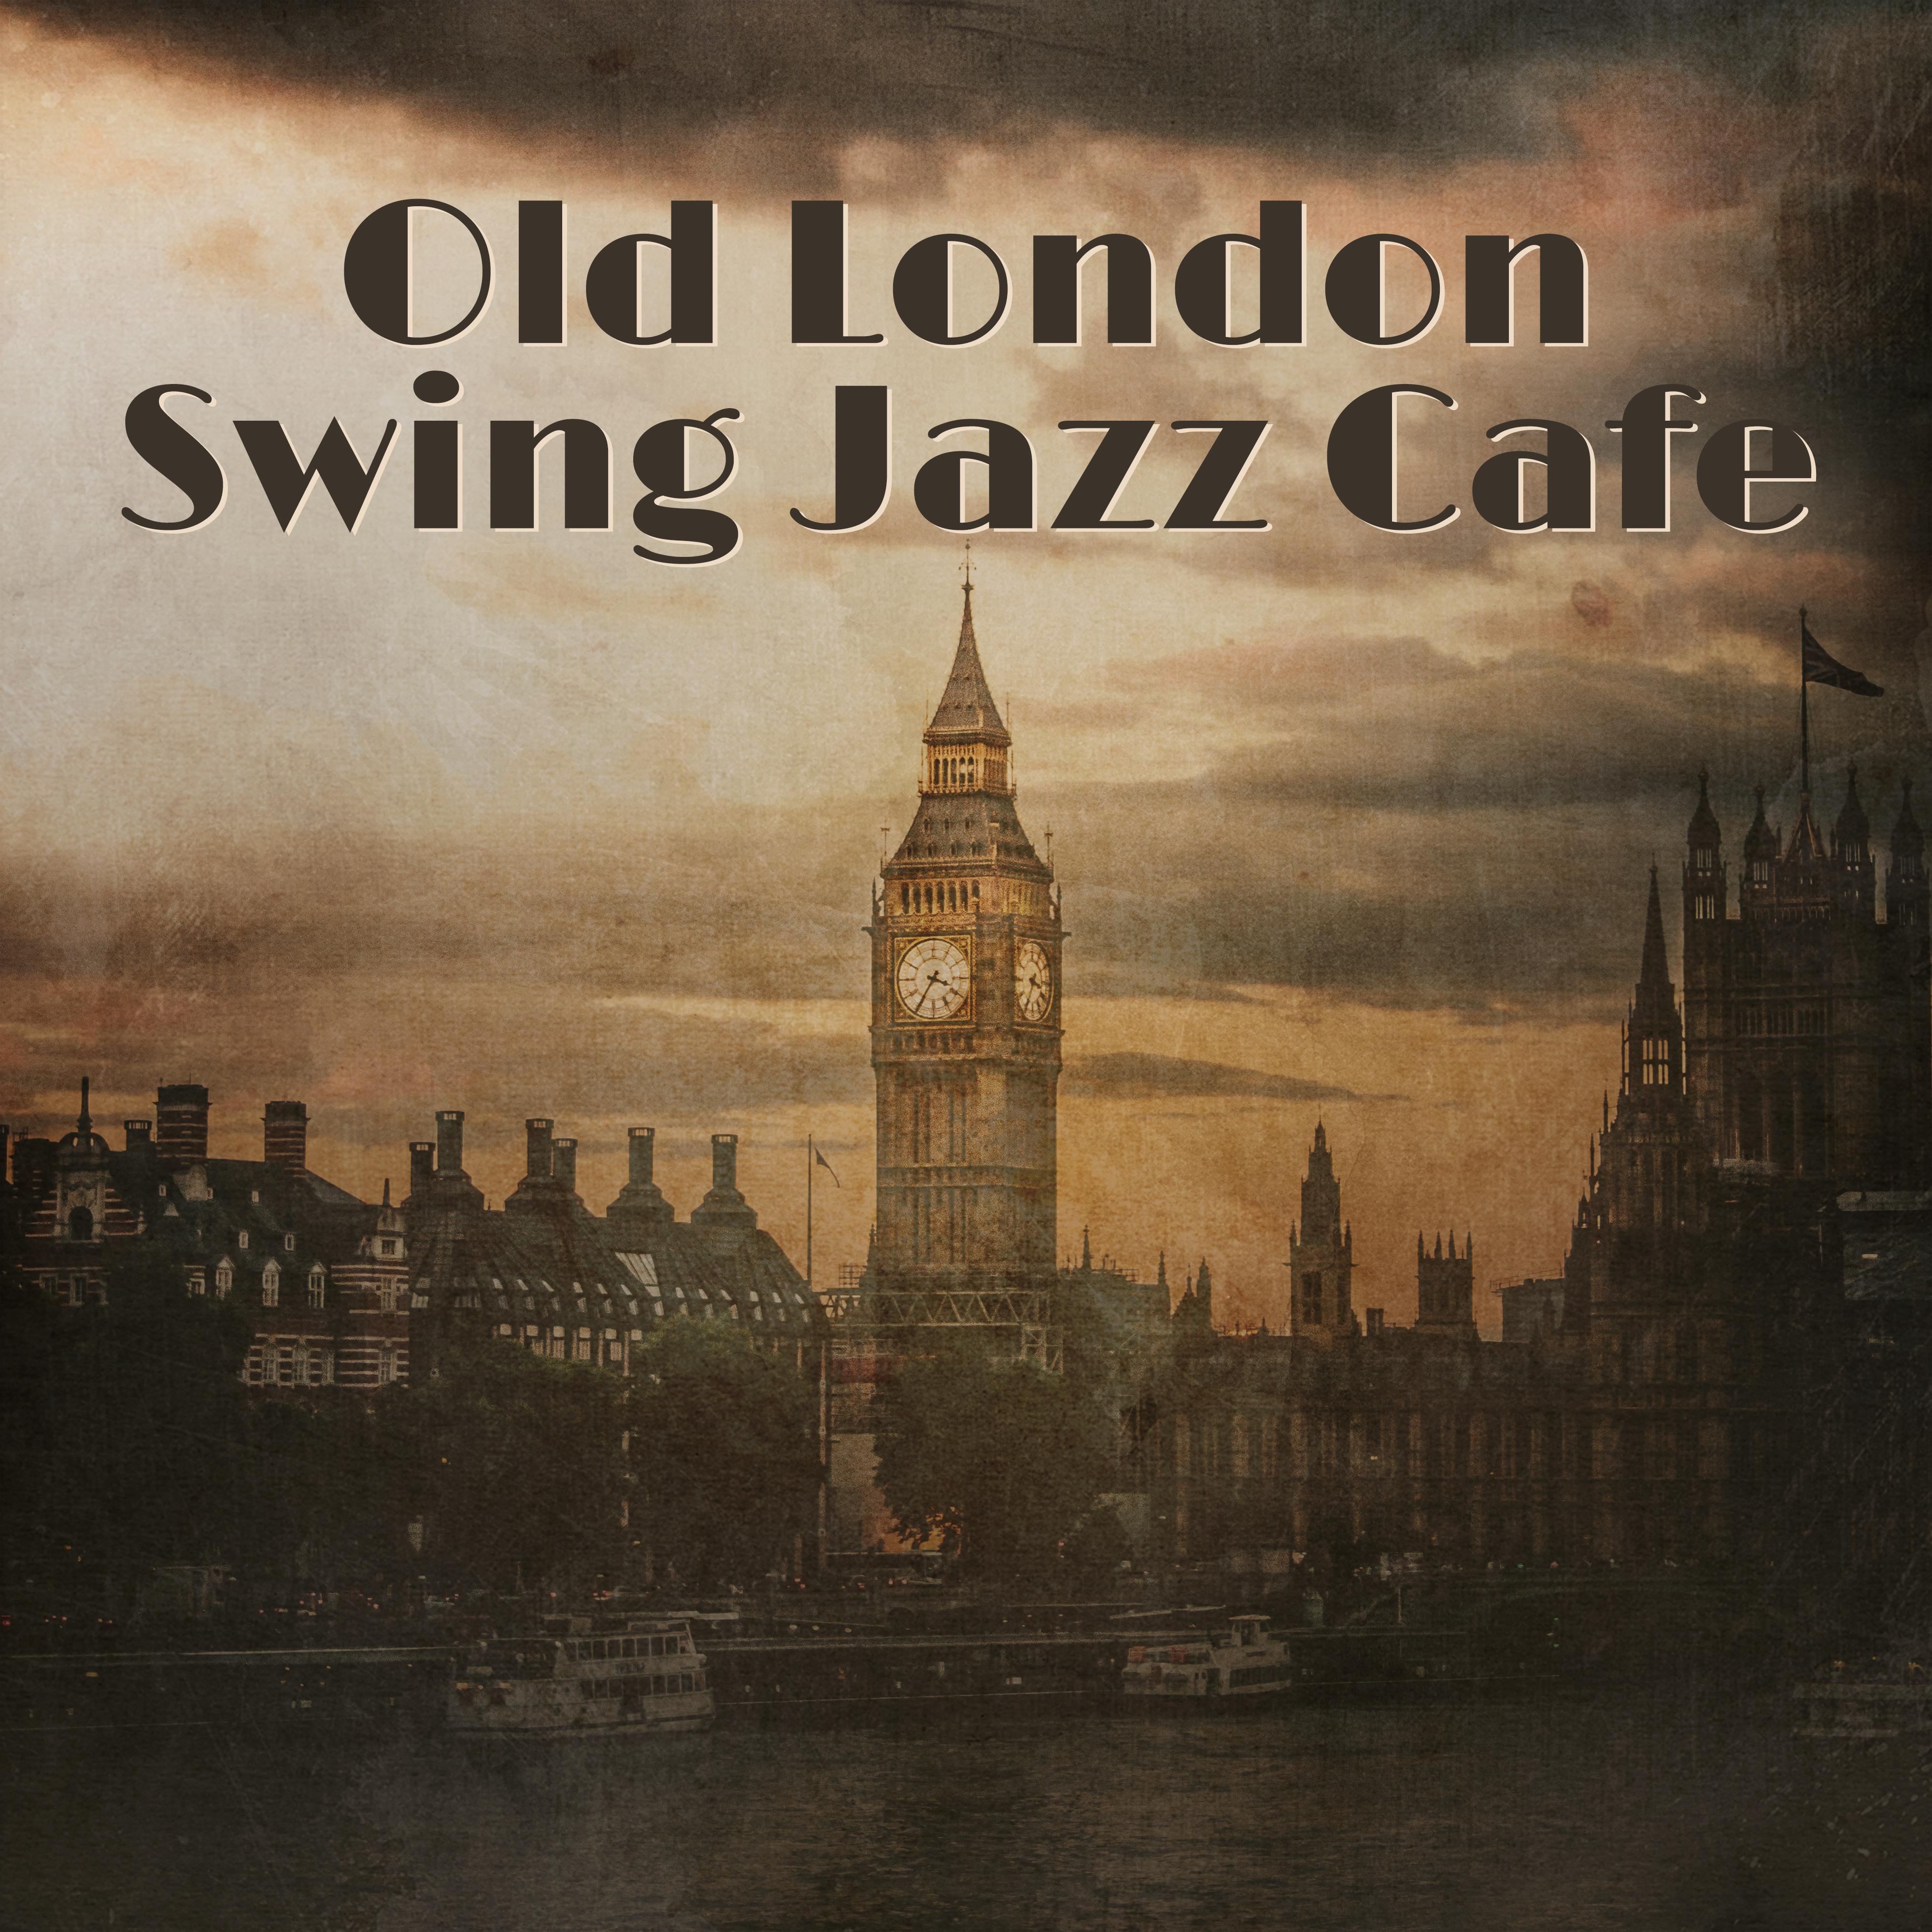 Old London Swing Jazz Cafe: 2019 Smooth Jazz Instrumental Music for Perfect Evening Background, Meeting with Friends Songs, Lovely Weekend, Positive Jazz Vibrations